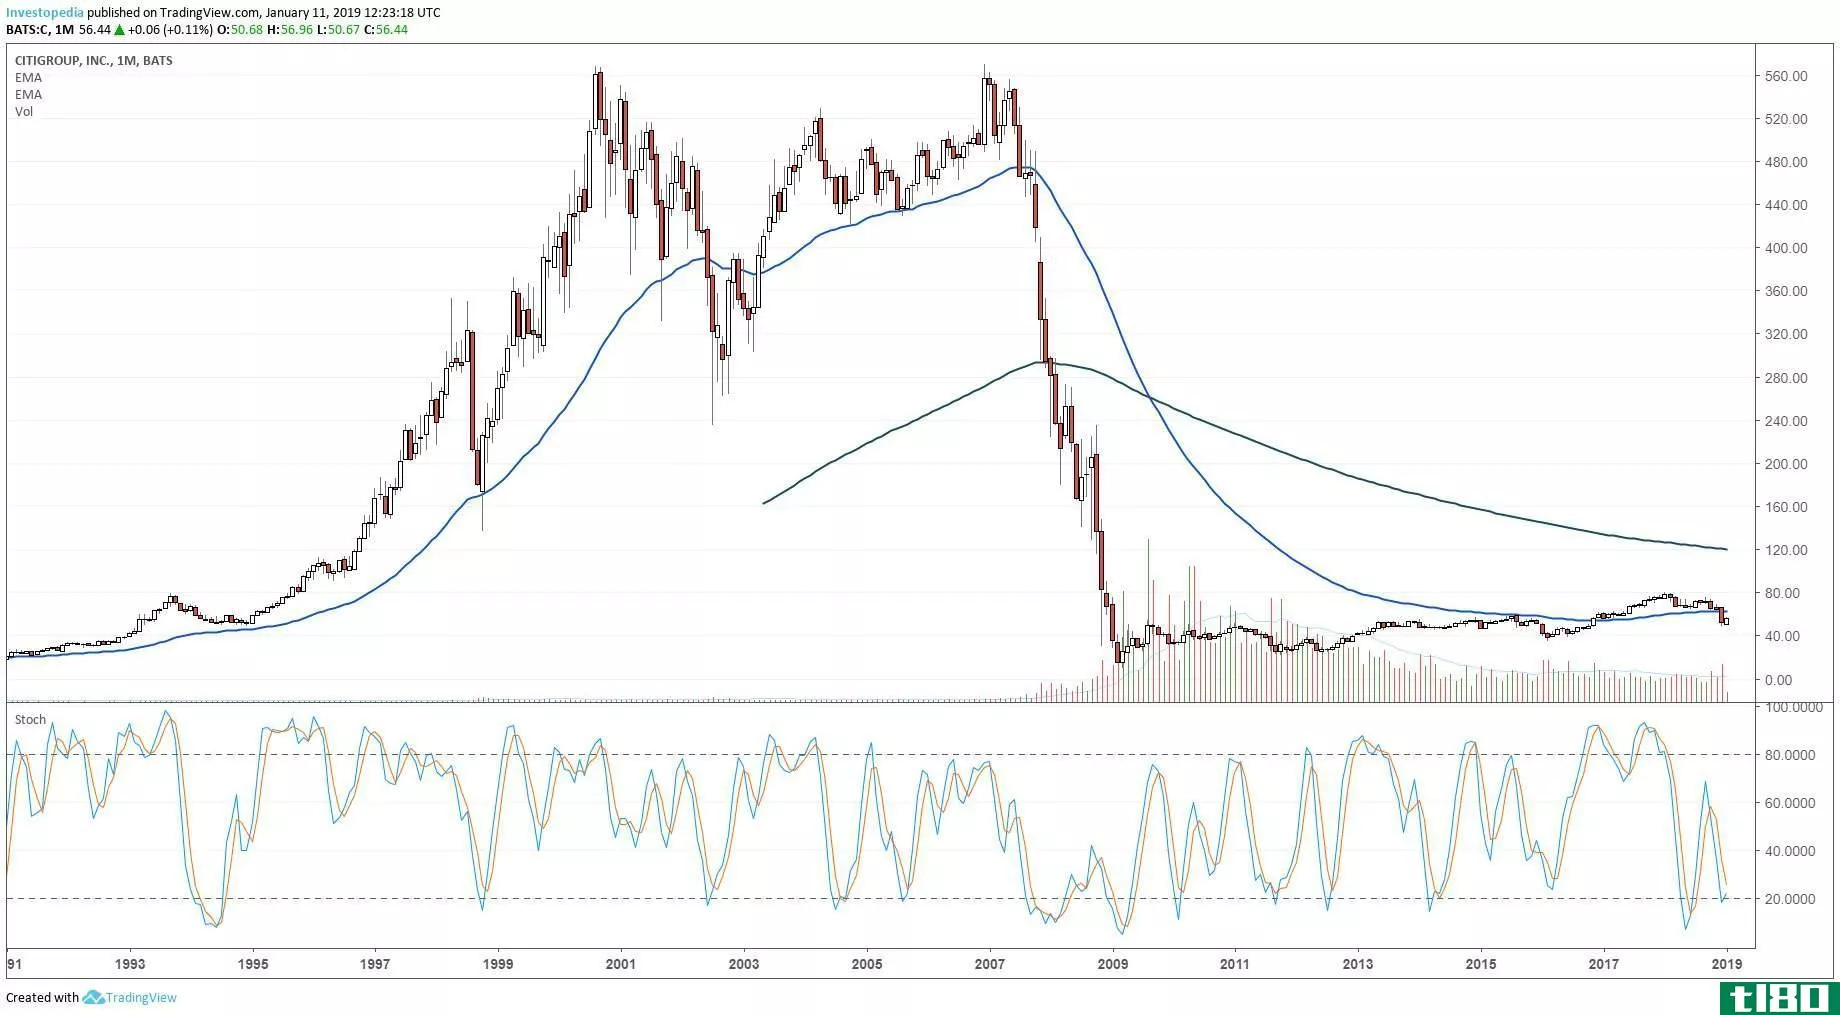 Monthly technical chart showing the share price performance of Citigroup Inc. (C)